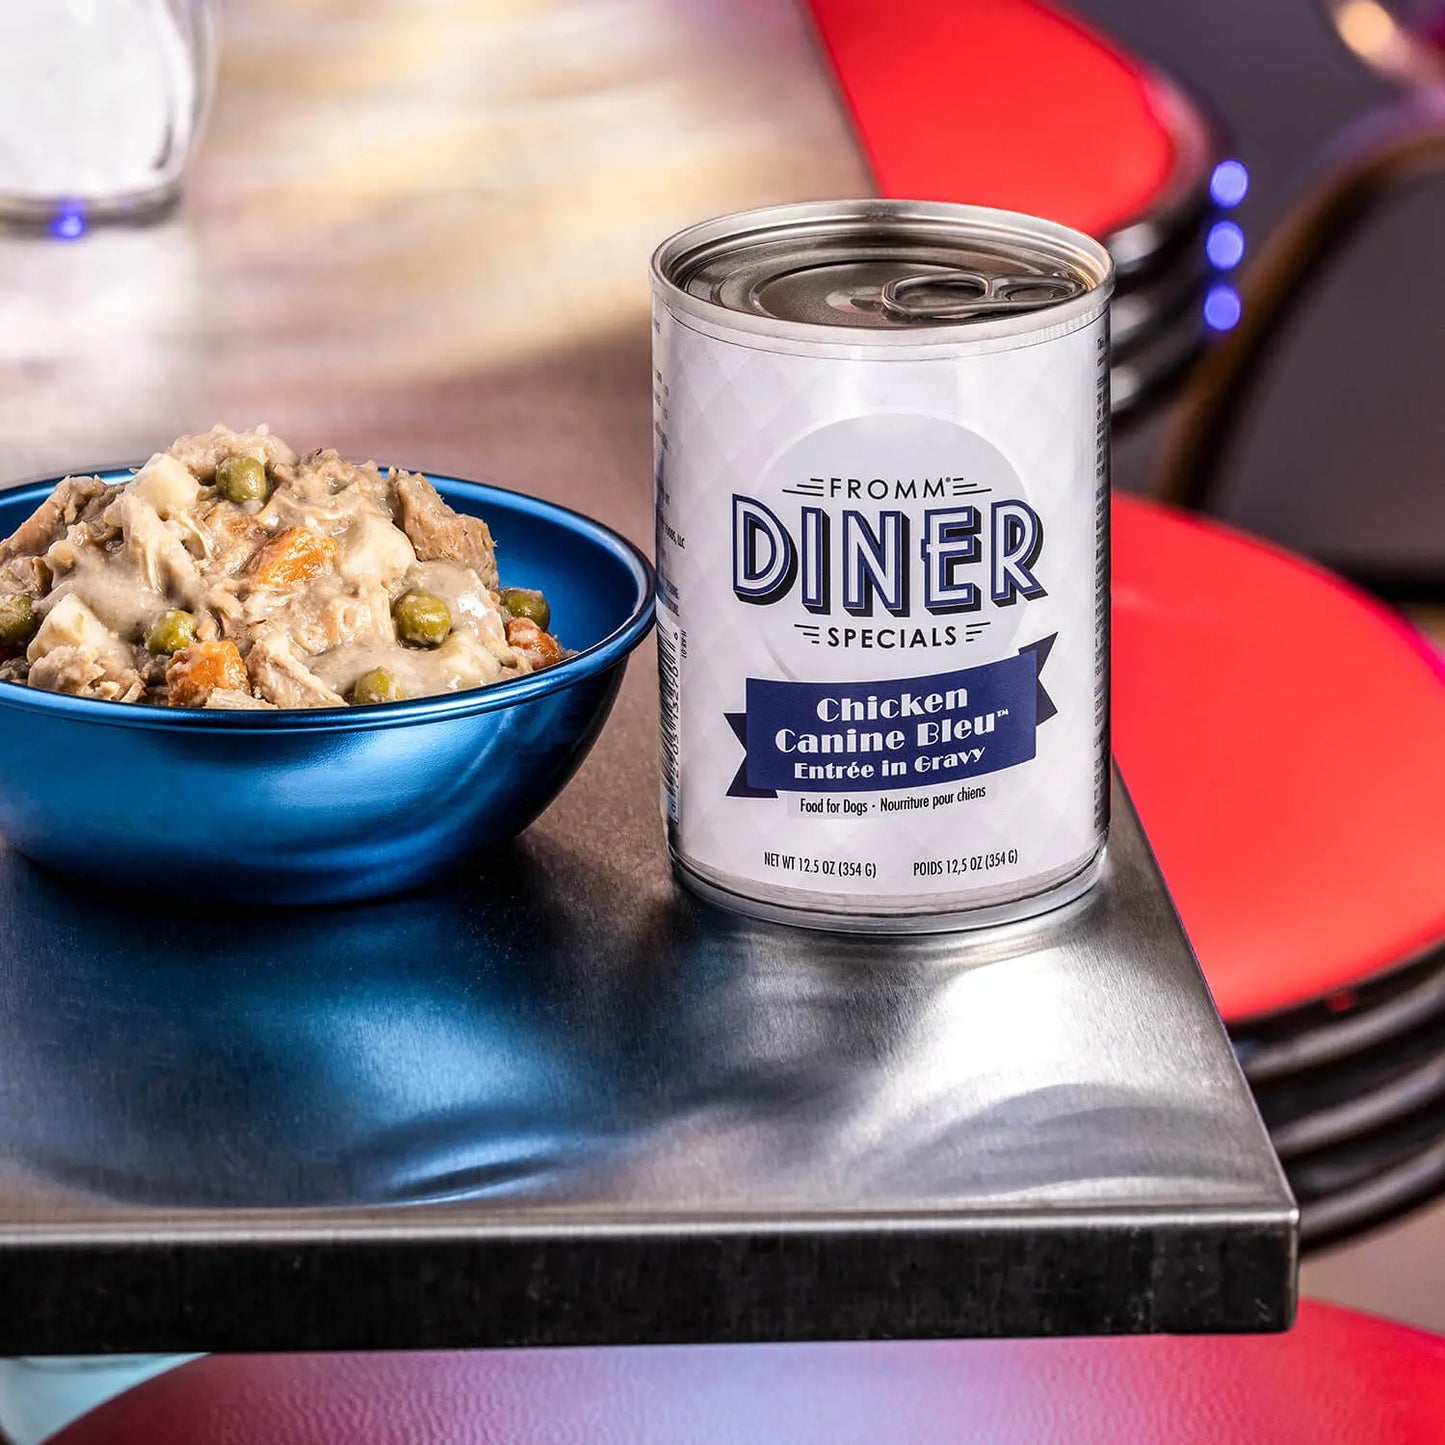 Fromm Diner Specials Chicken Canine Bleu Entree in Gravy Wet Dog Food 12 / 12.5 oz Fromm